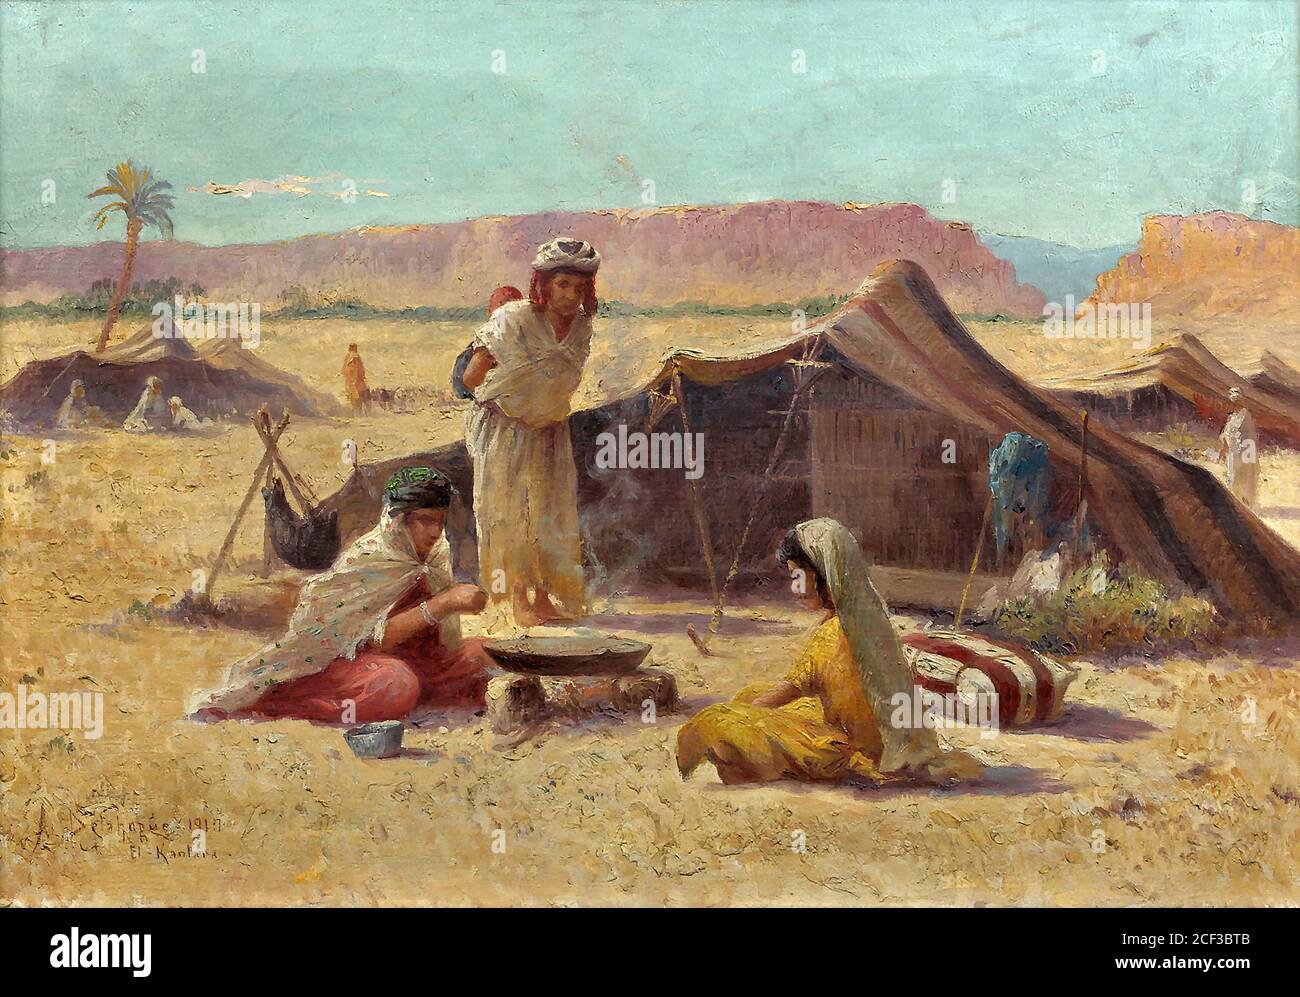 Delahogue Alexis Auguste - Campement Nomade a El Kantara - French School -  19th Century Stock Photo - Alamy